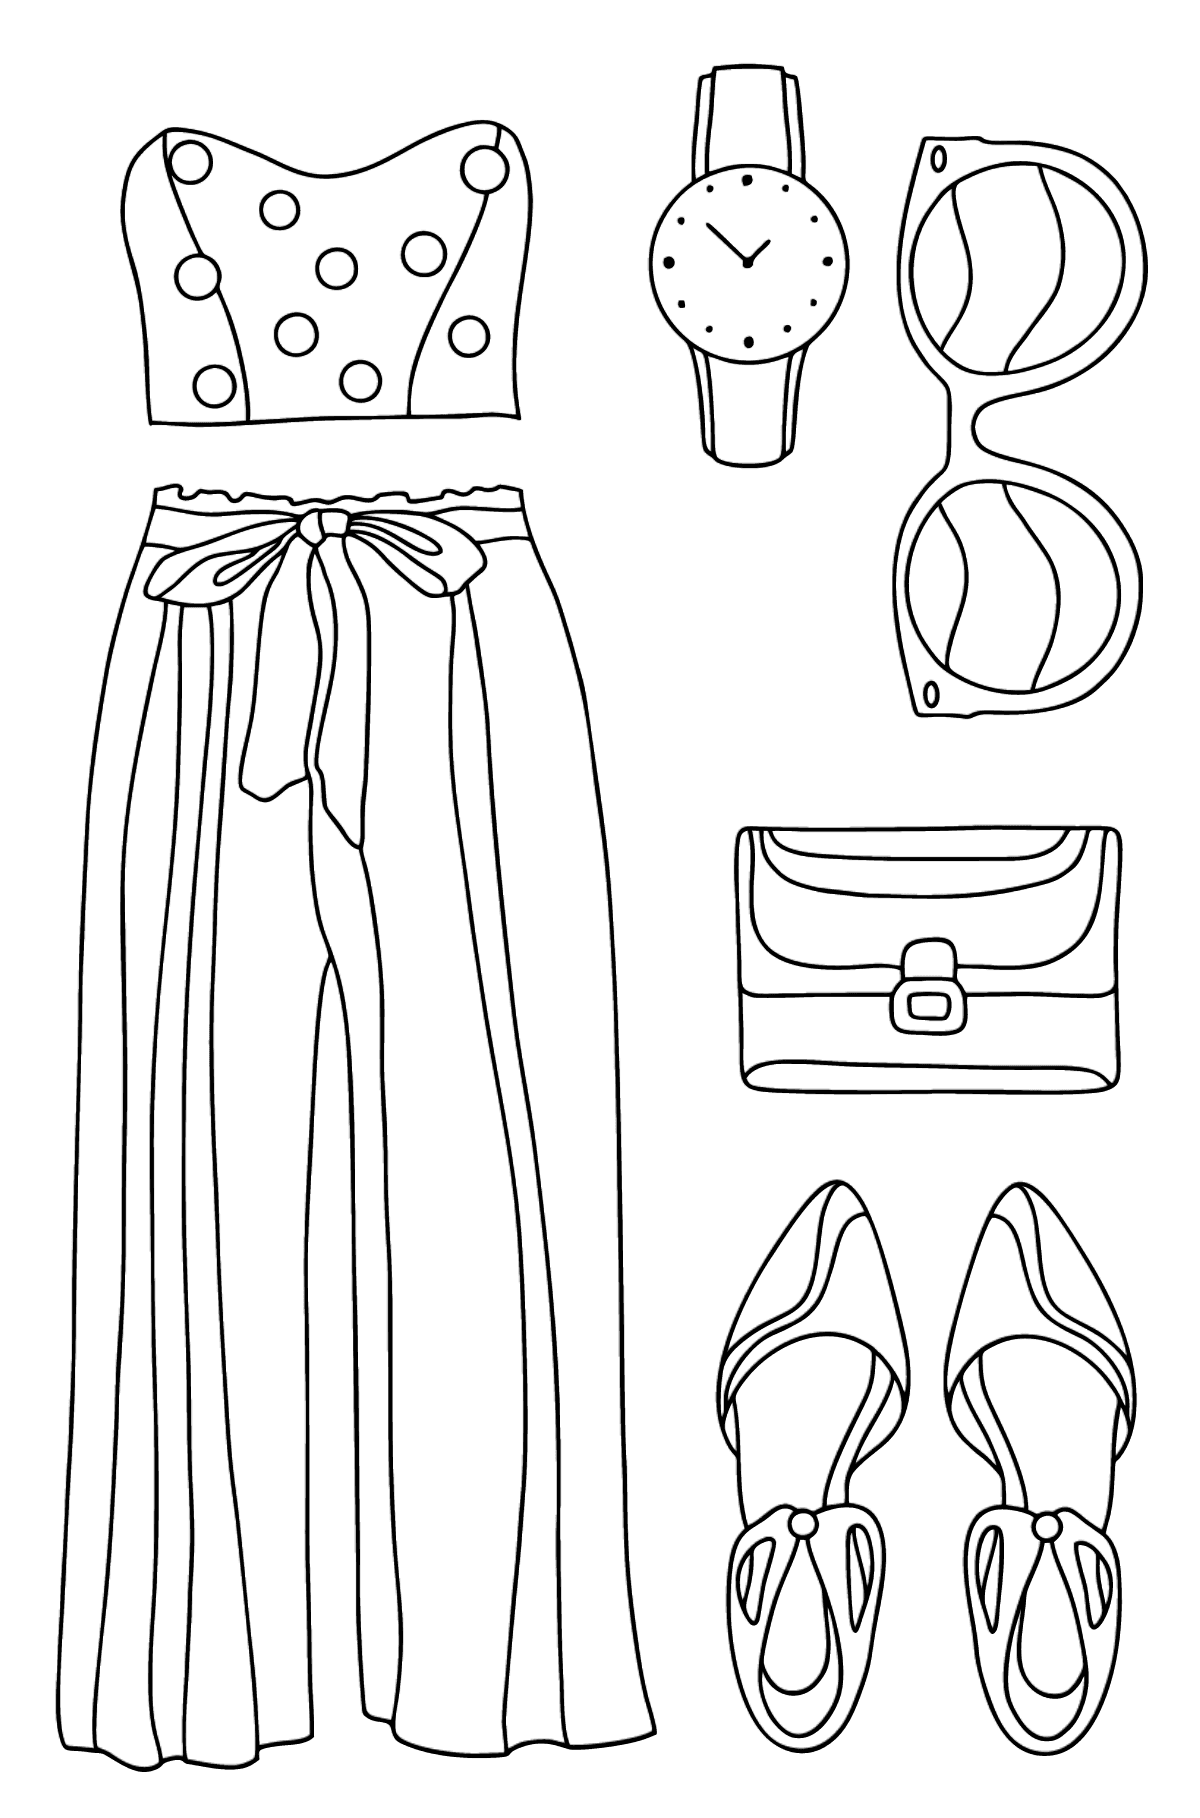 Fashion & Style coloring pages for Adults - Online or Printable